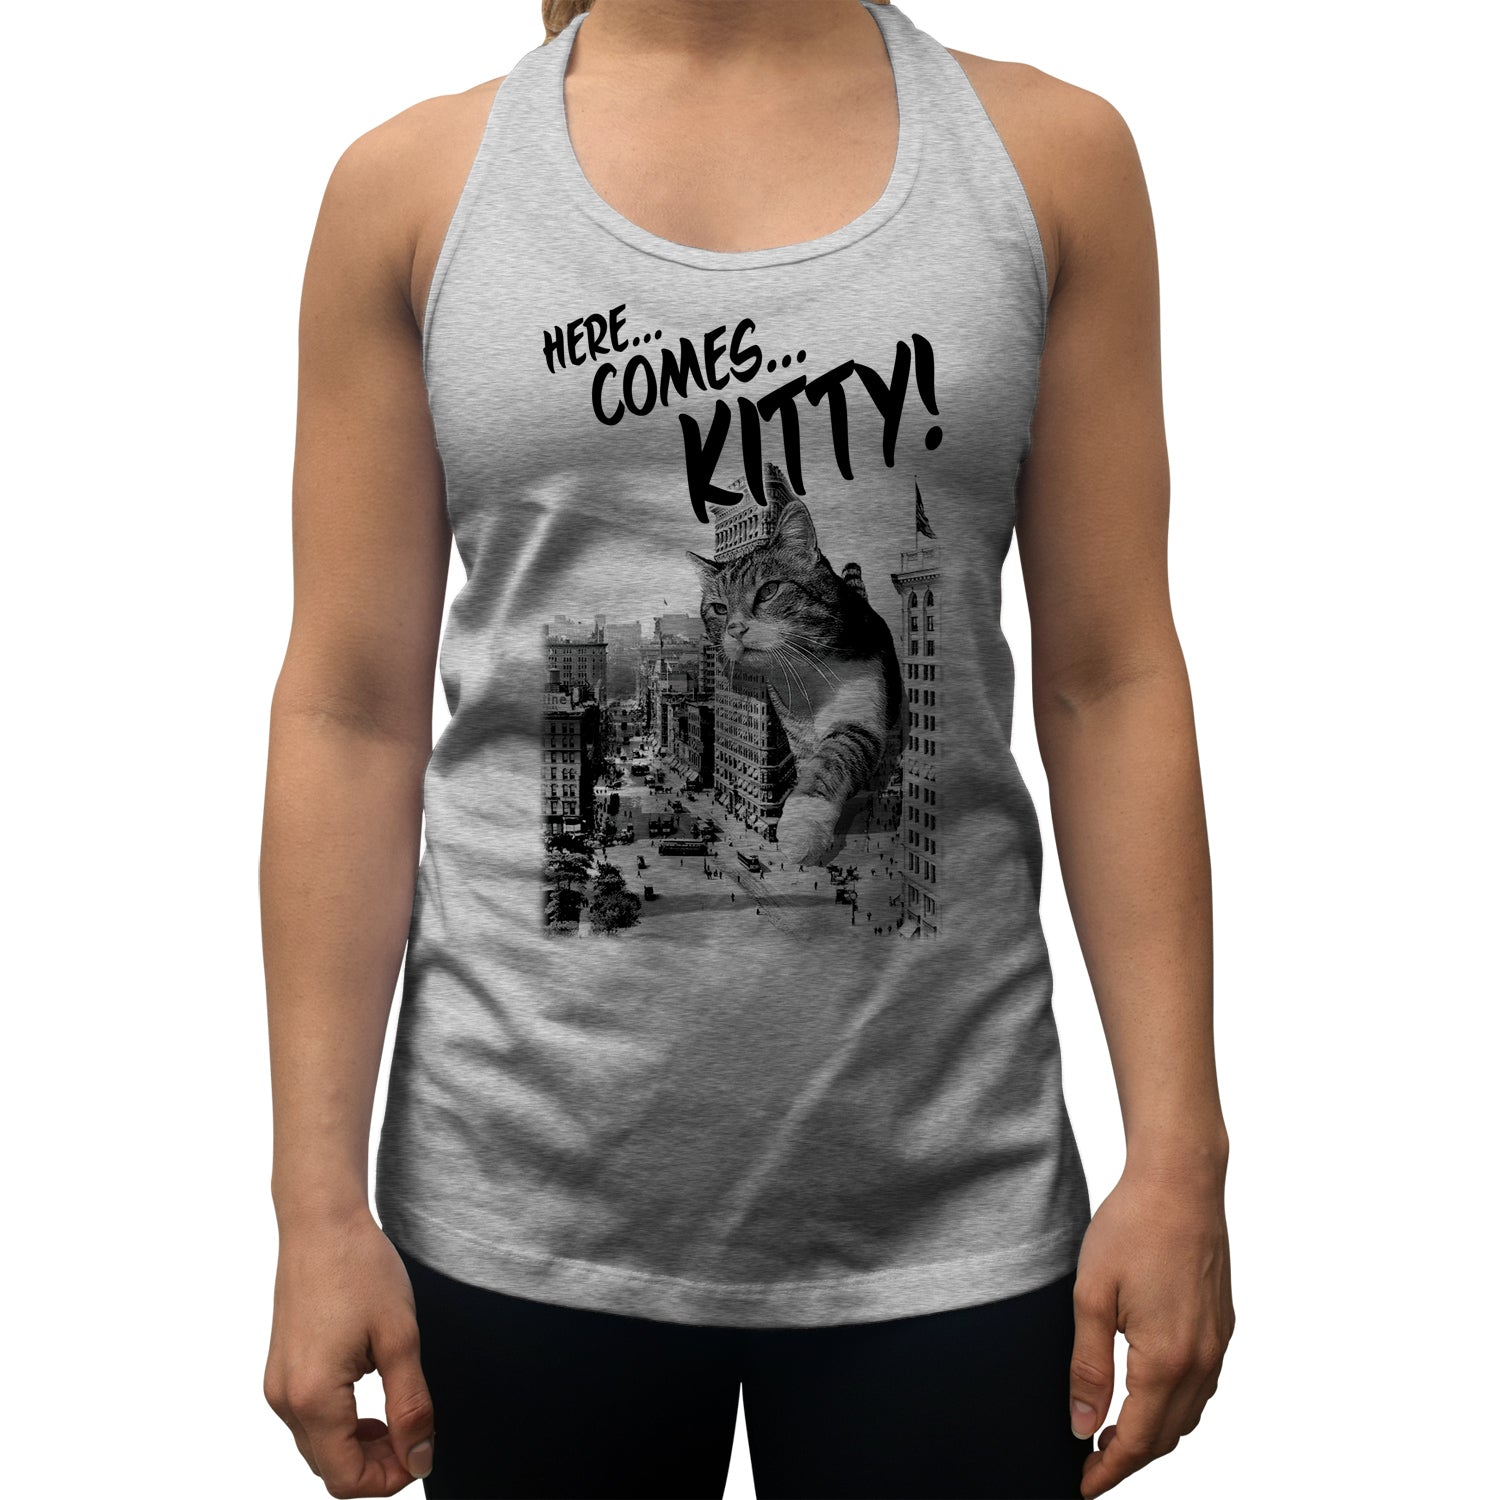 Women's Here Comes Kitty Racerback Tank Top